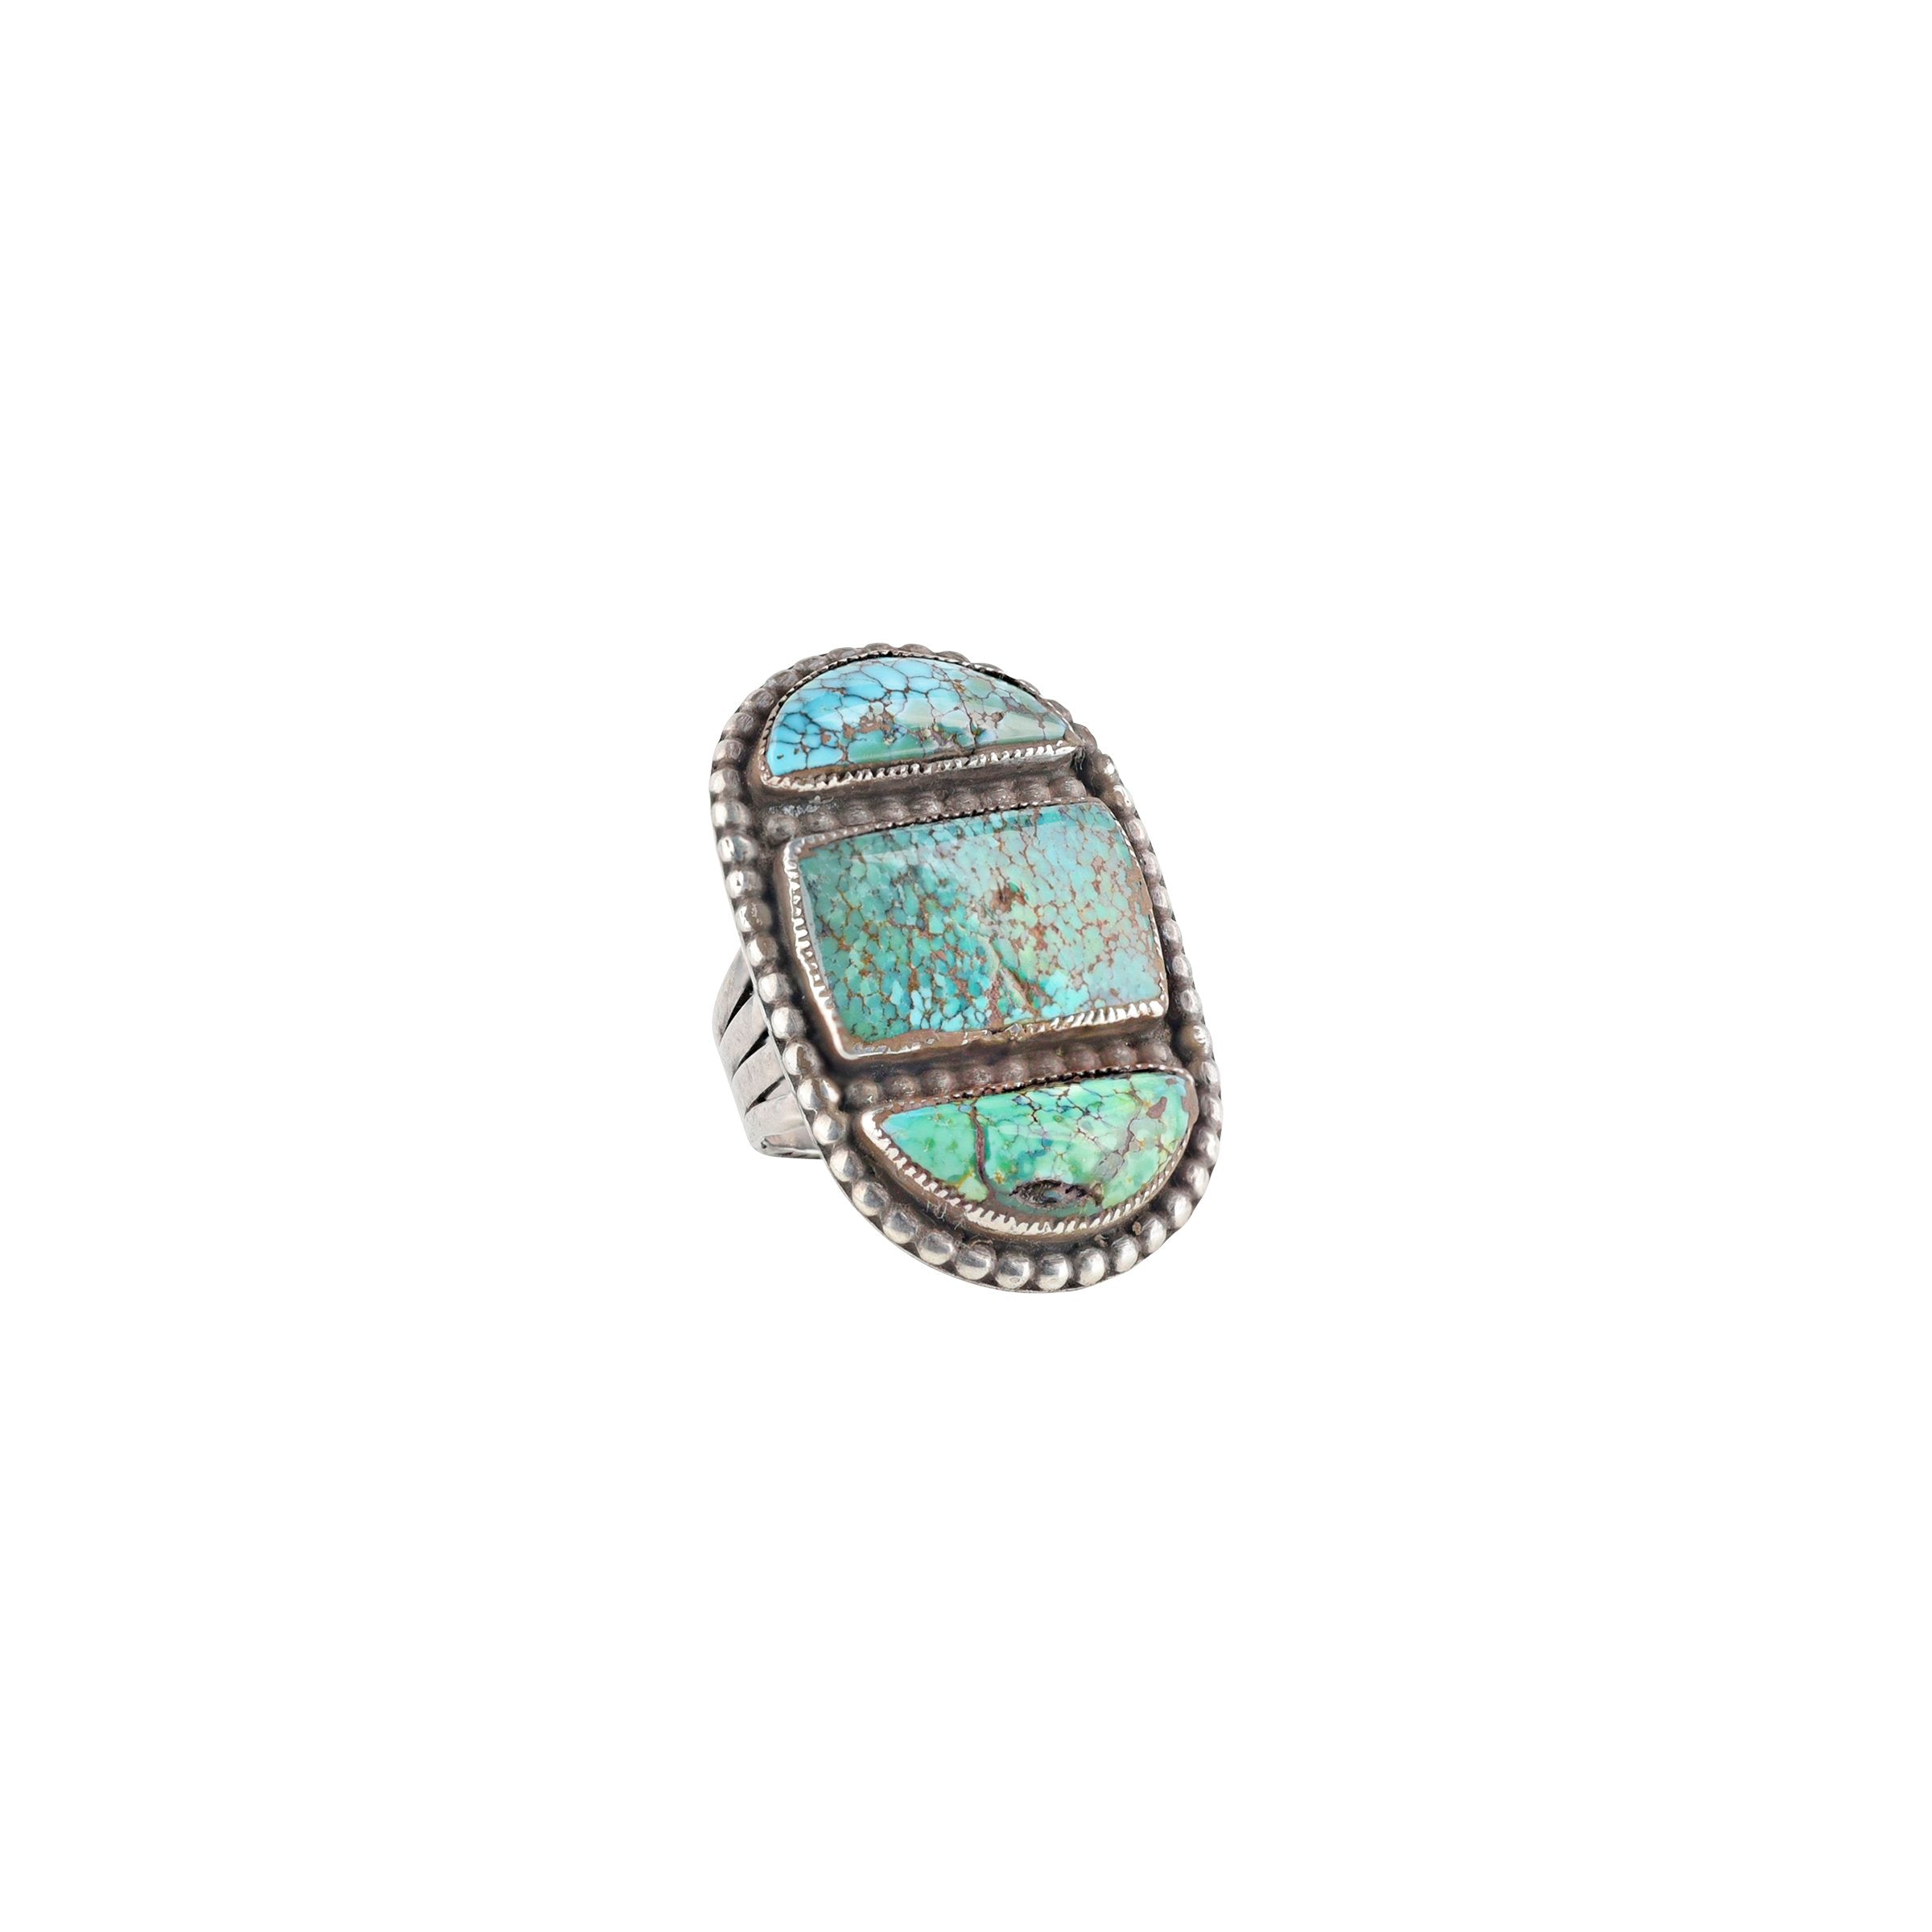 Vintage #8 Turquoise Ring - Size 7